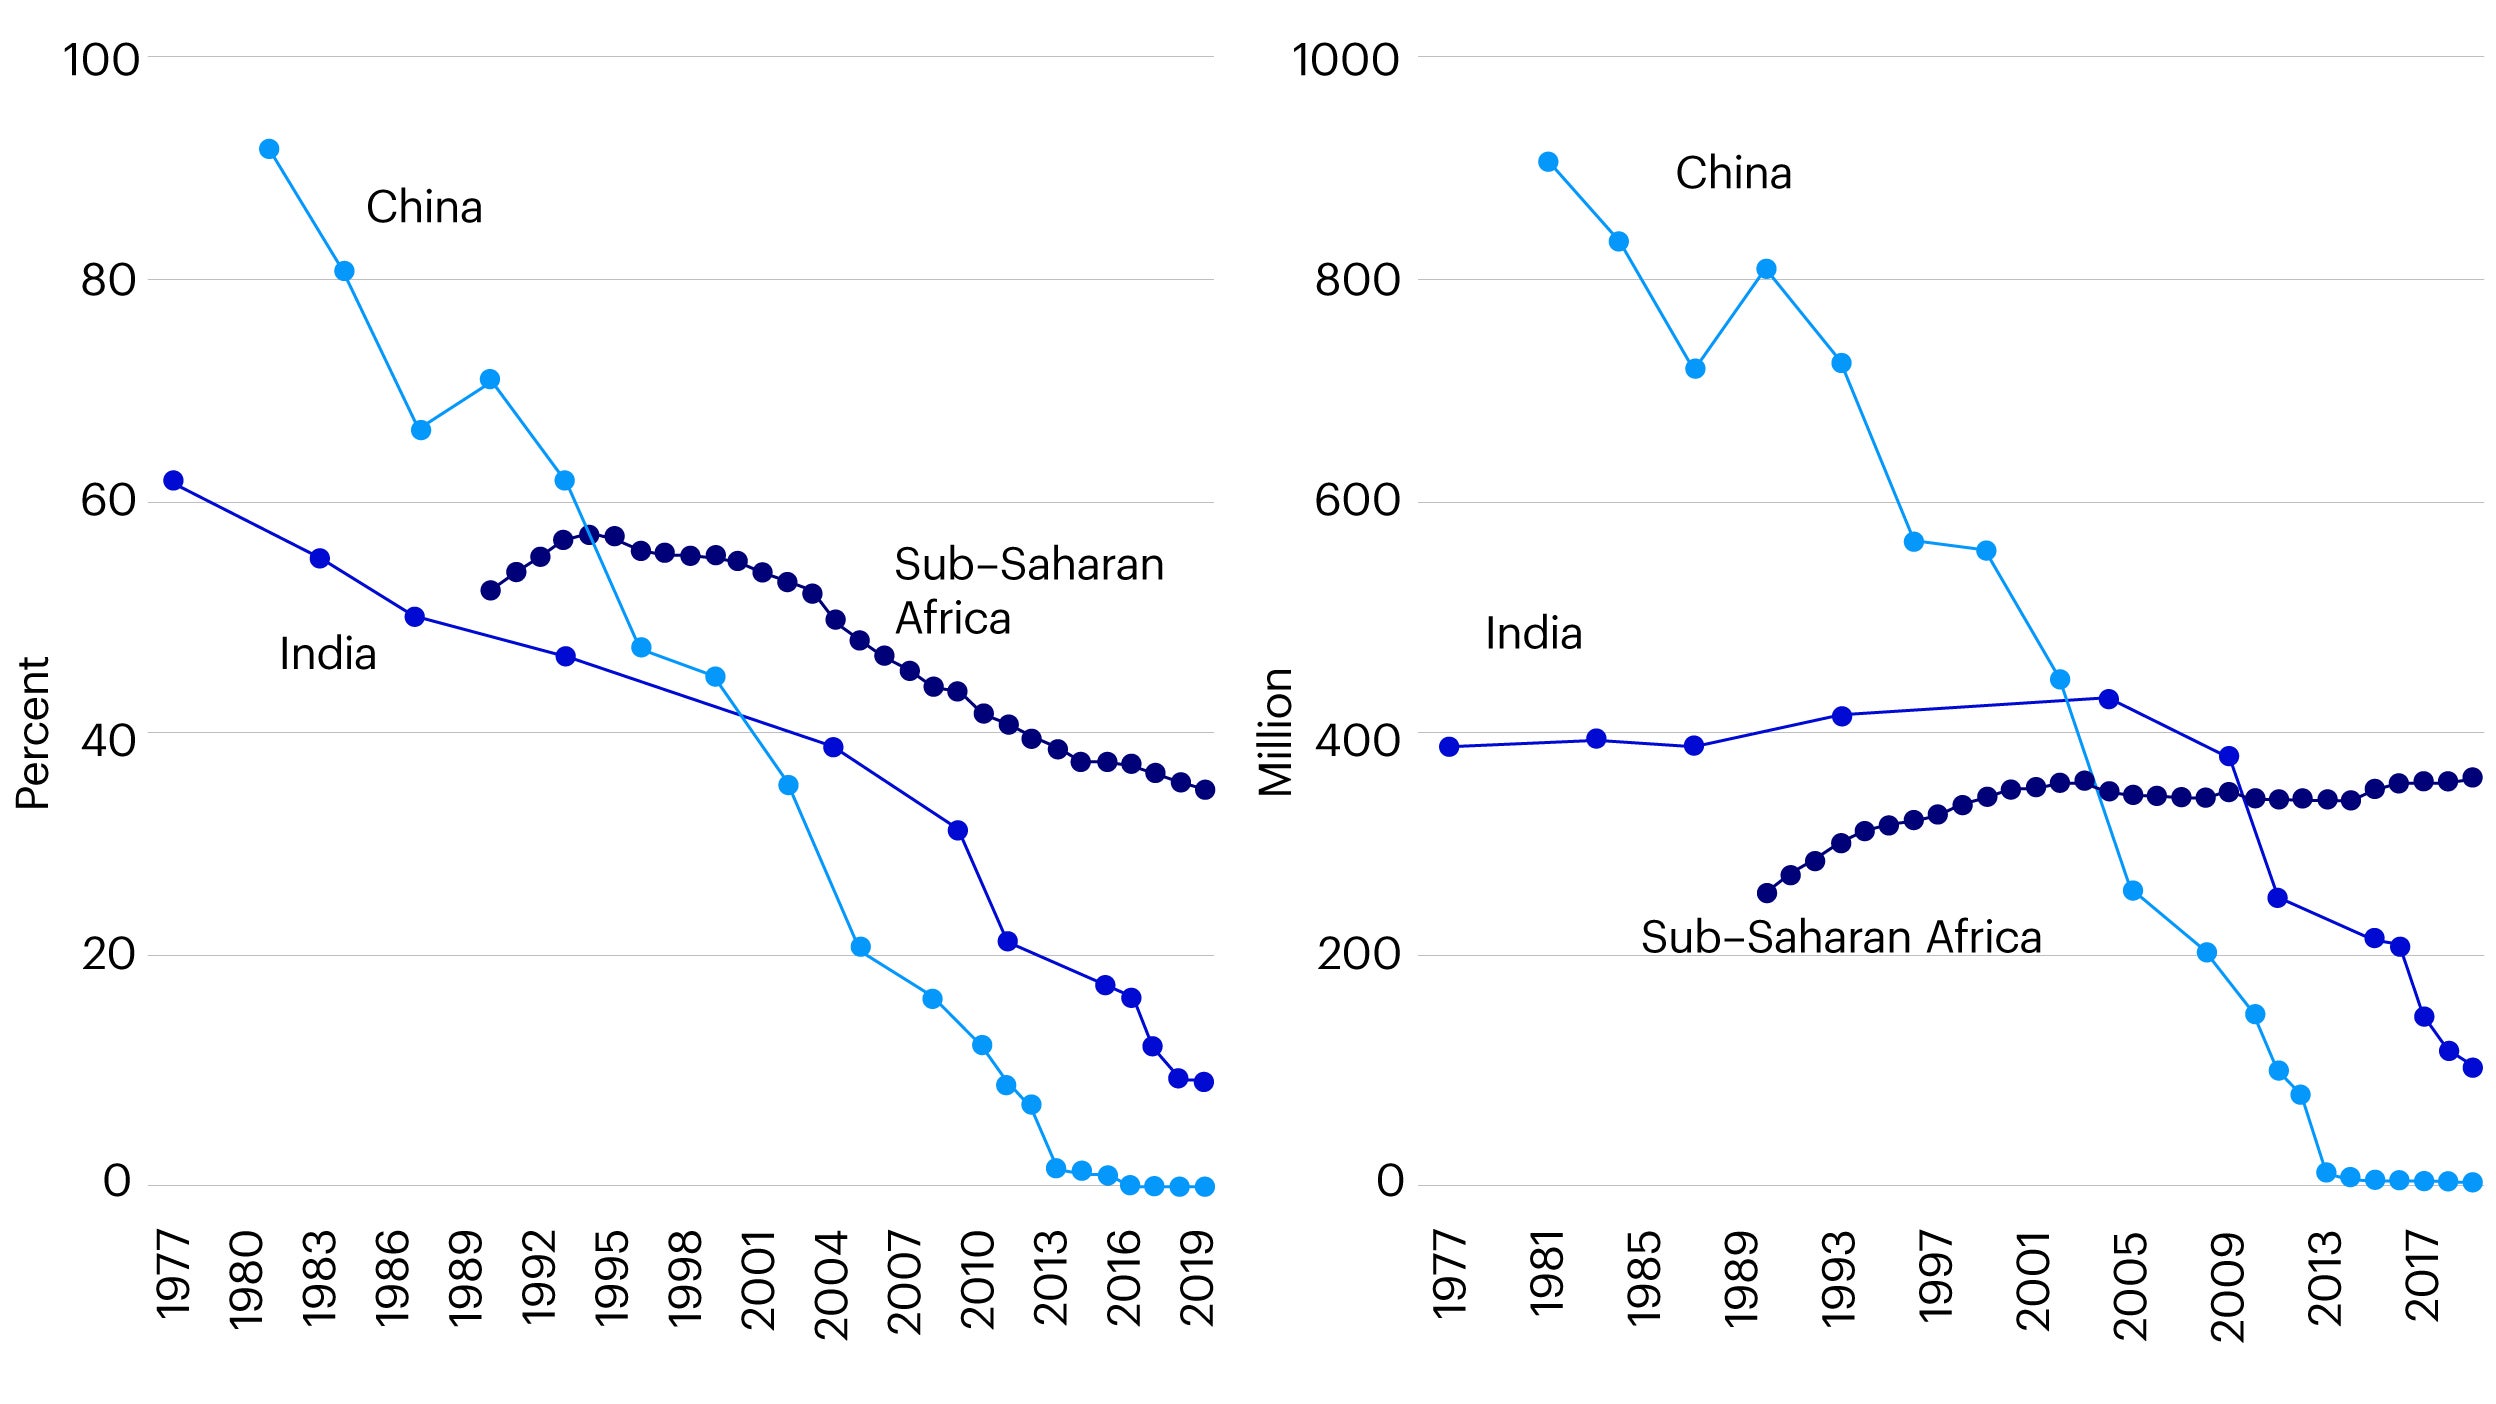 Figure 3 - Extreme poverty rate and number of poor people at $2.15 a day, 1977-2019, $PPP 2017